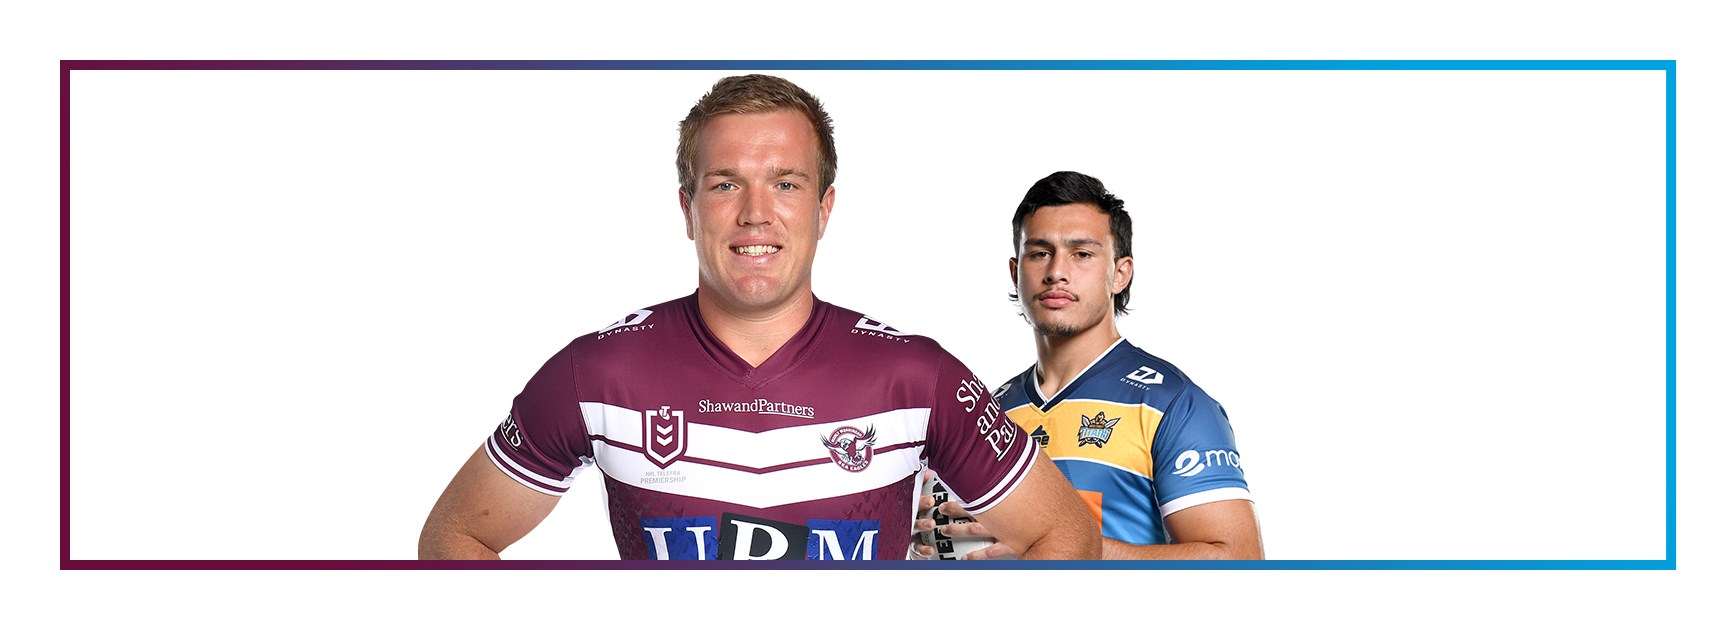 Sea Eagles Guide for Titans match in Mudgee